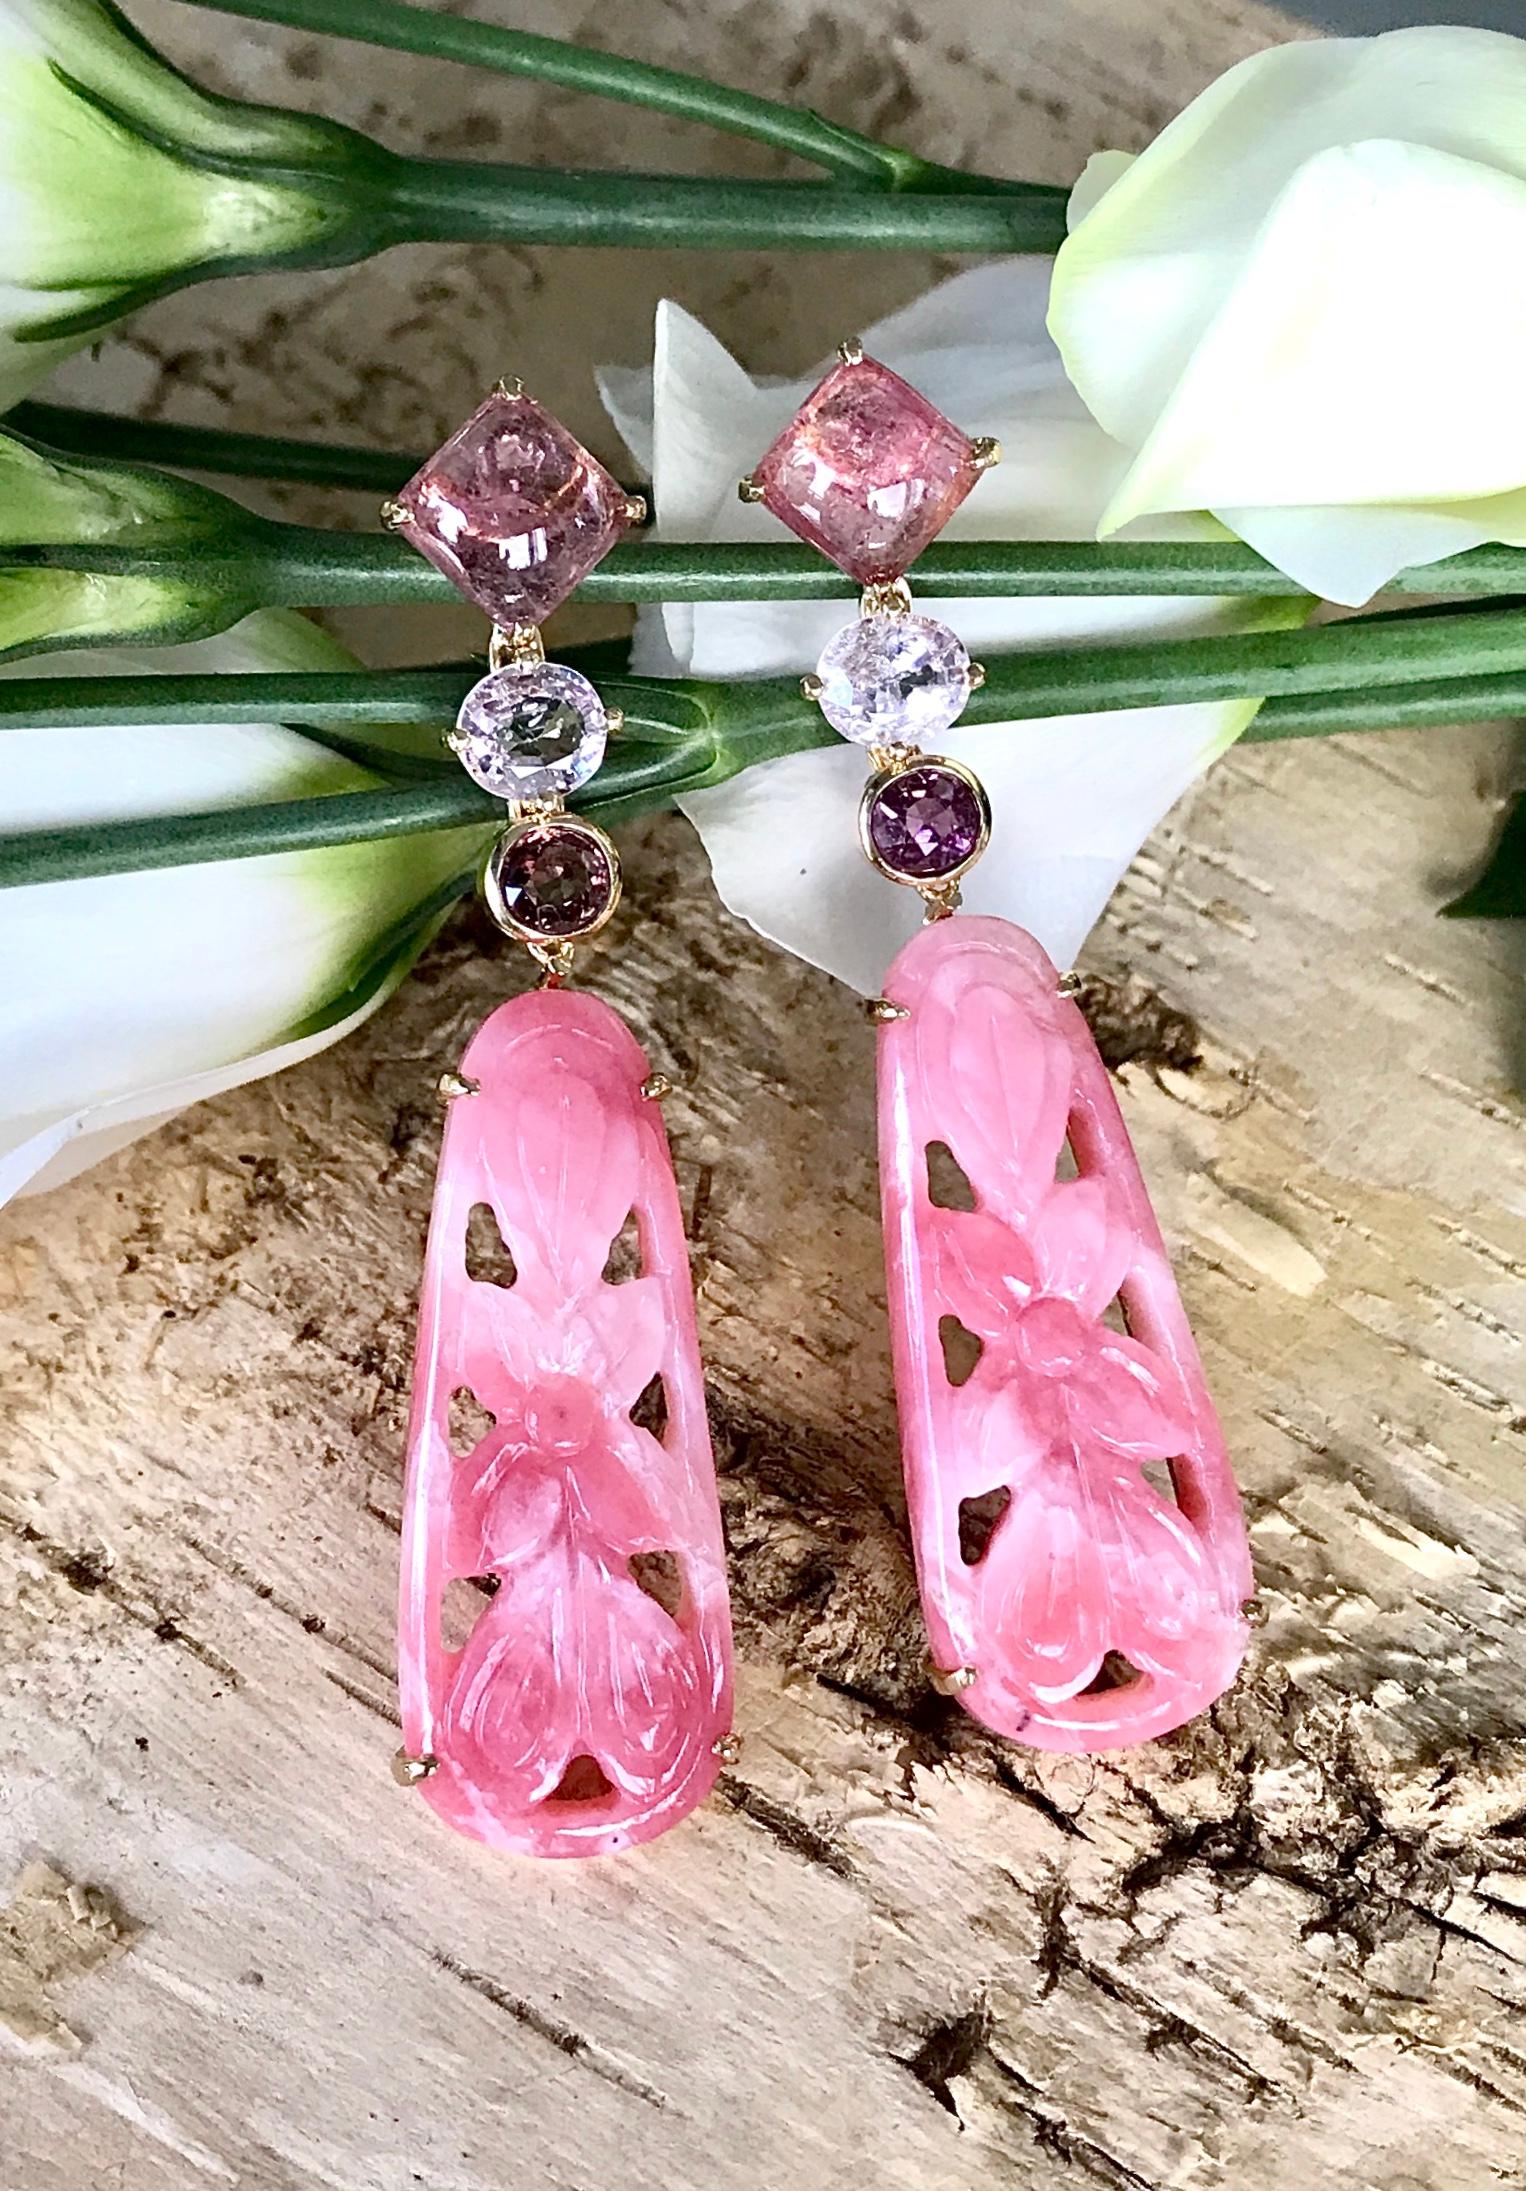 One-of-a-kind carved pink opal, sapphire and tourmaline drop dangle earrings, handcrafted in 18 karat yellow gold. 2.44 inches or 62 mm length.

These uniquely carved pink opals are combined with sparkling sapphires and tourmalines to create an